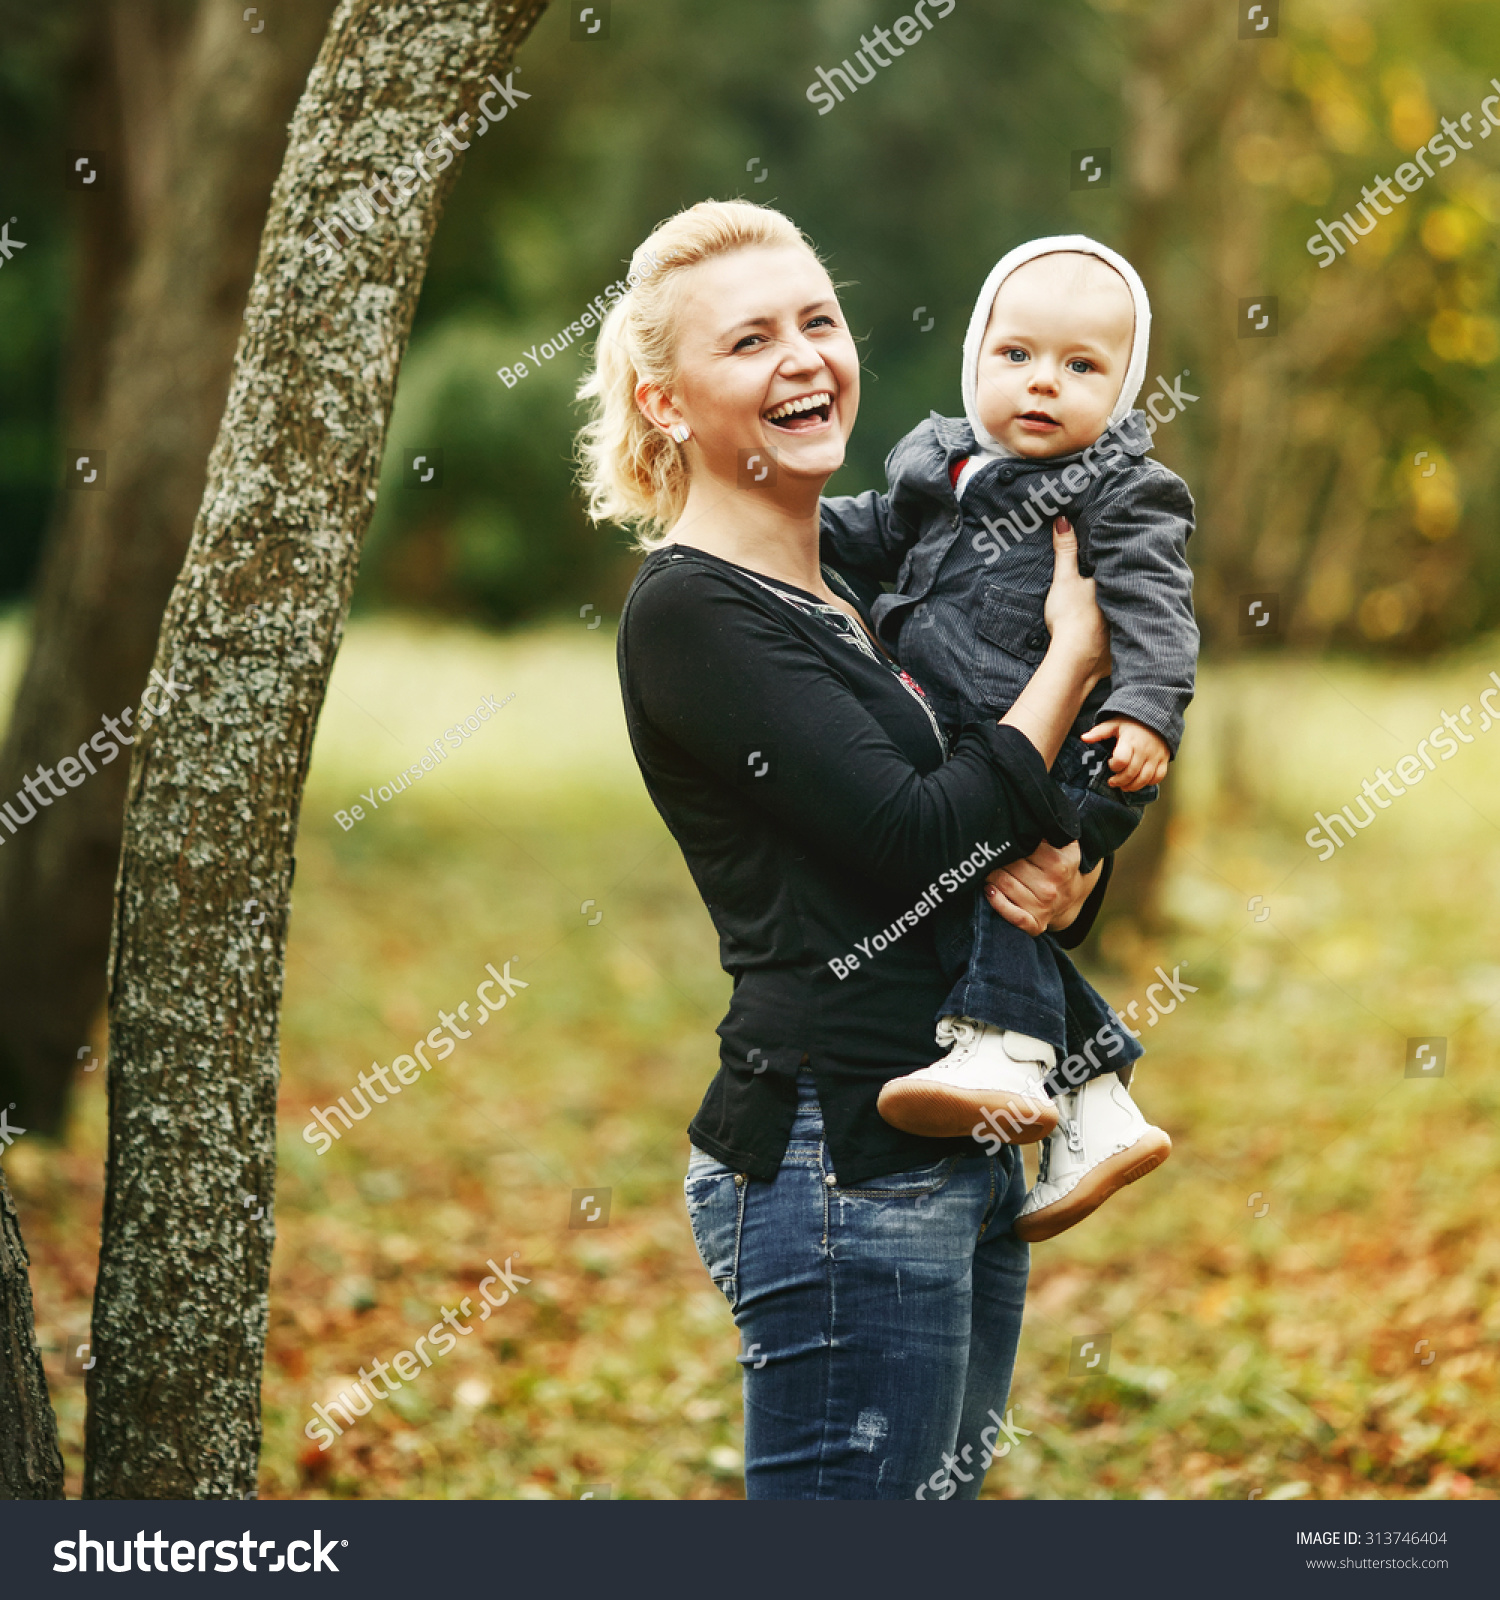 Young Mother Lovely Kid Boy Together Stock Photo 313746404 ...